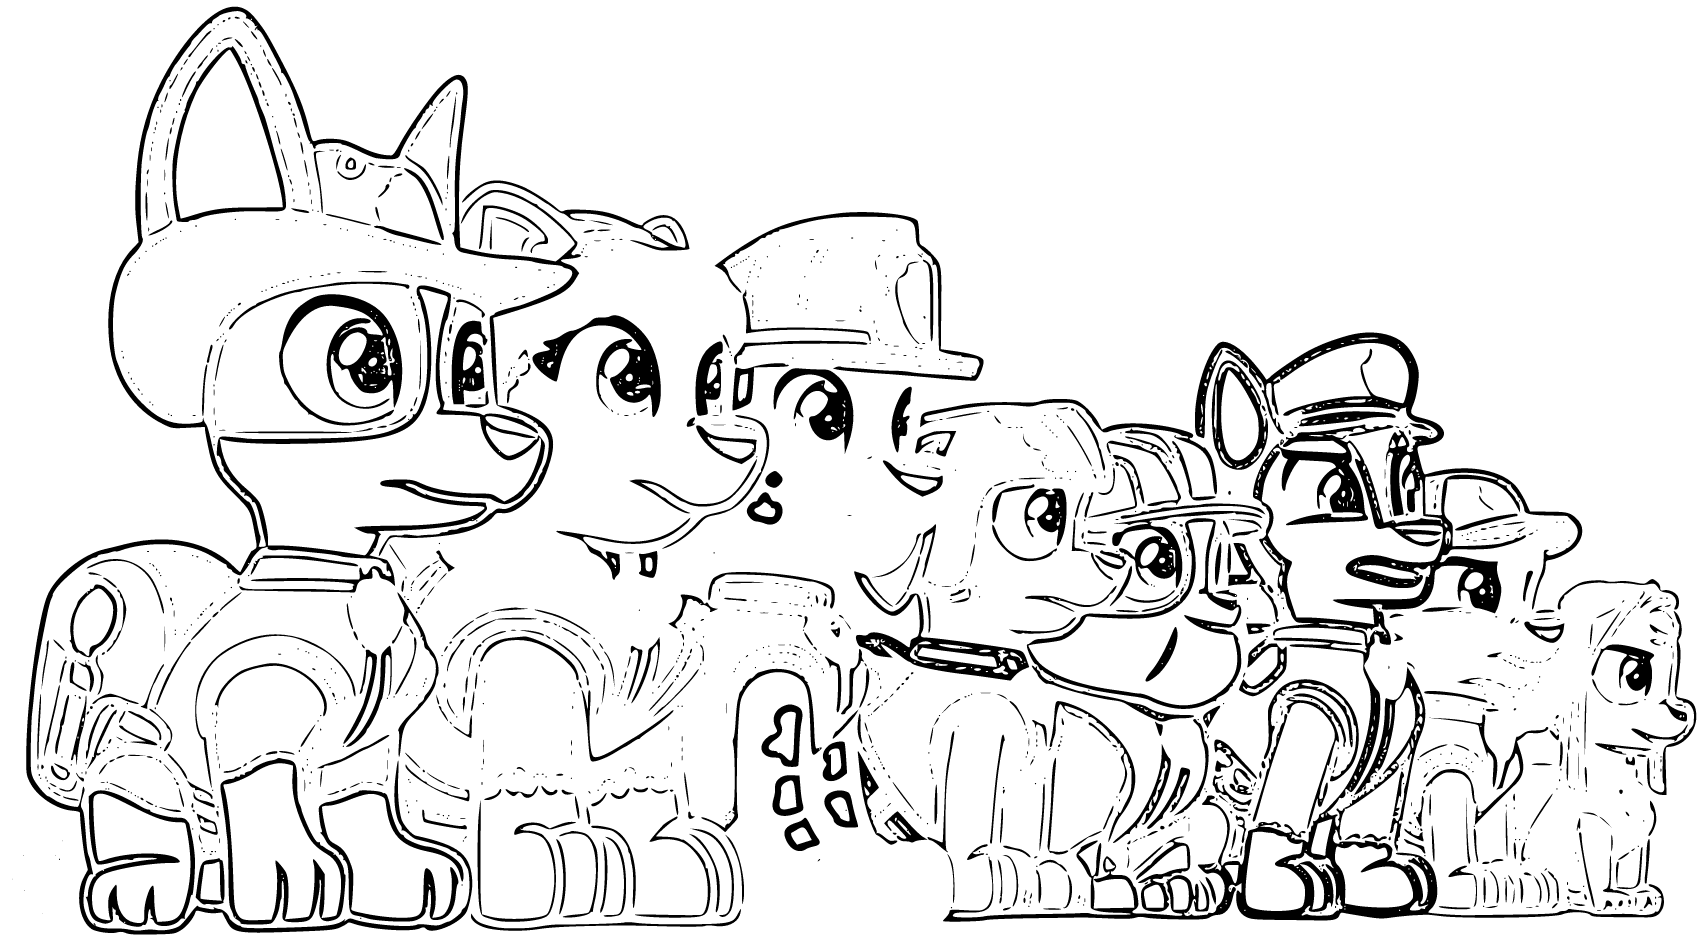 Paw Patrol Team ready to mission! Coloring Page (Paw Patrol) #533 ...